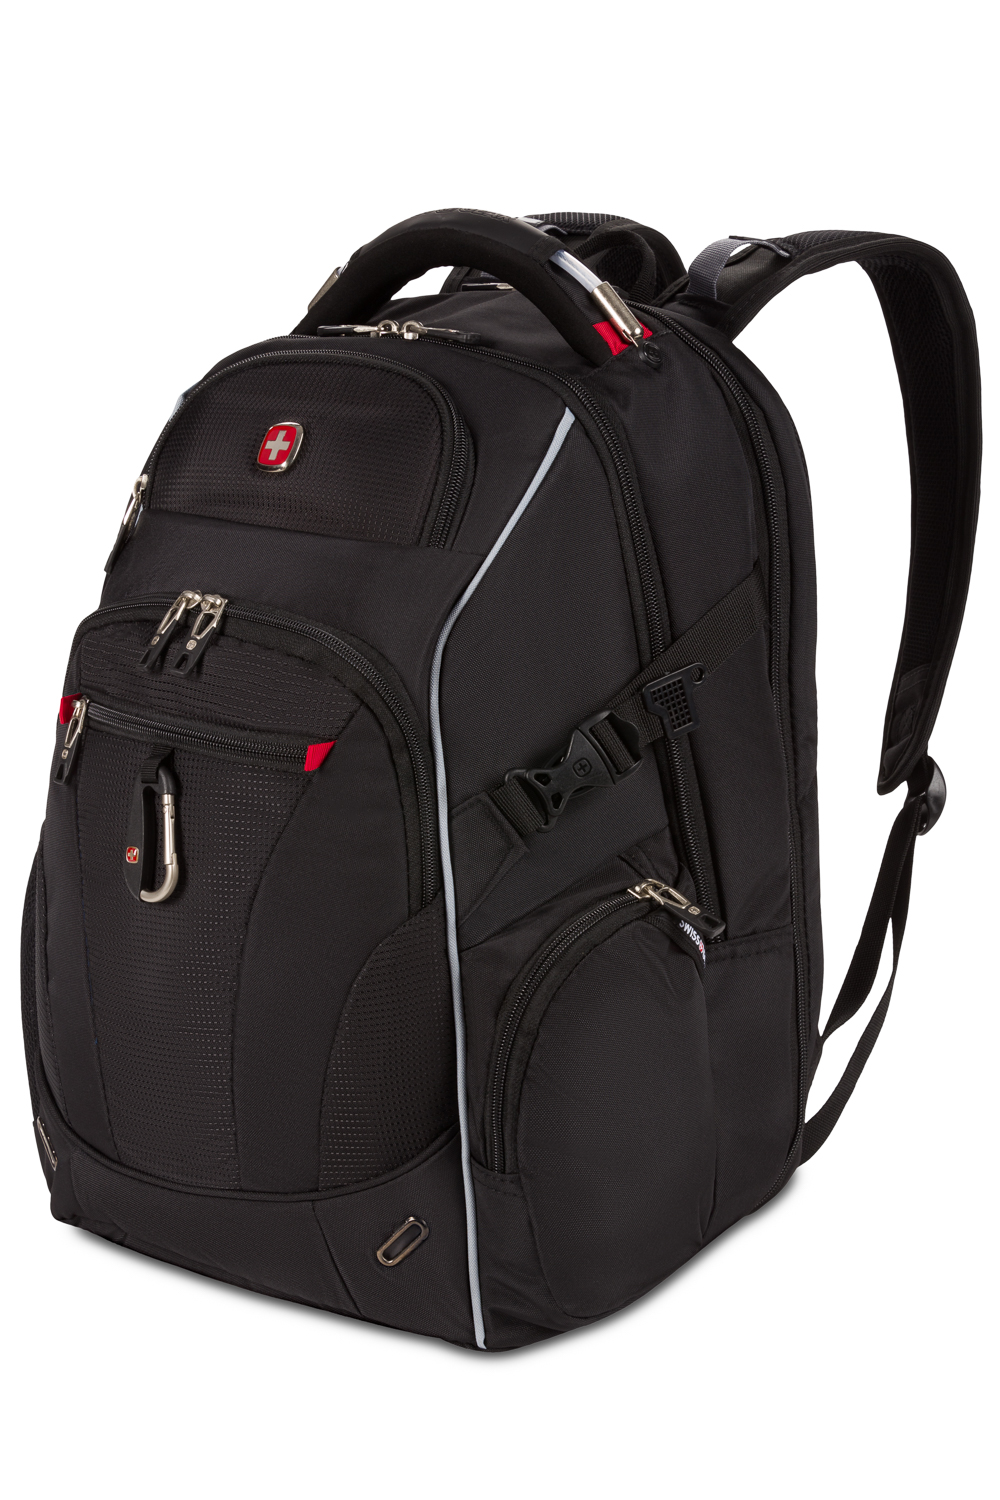 Swiss Gear Scan Smart Laptop Backpack SA6752 Black 15 inches